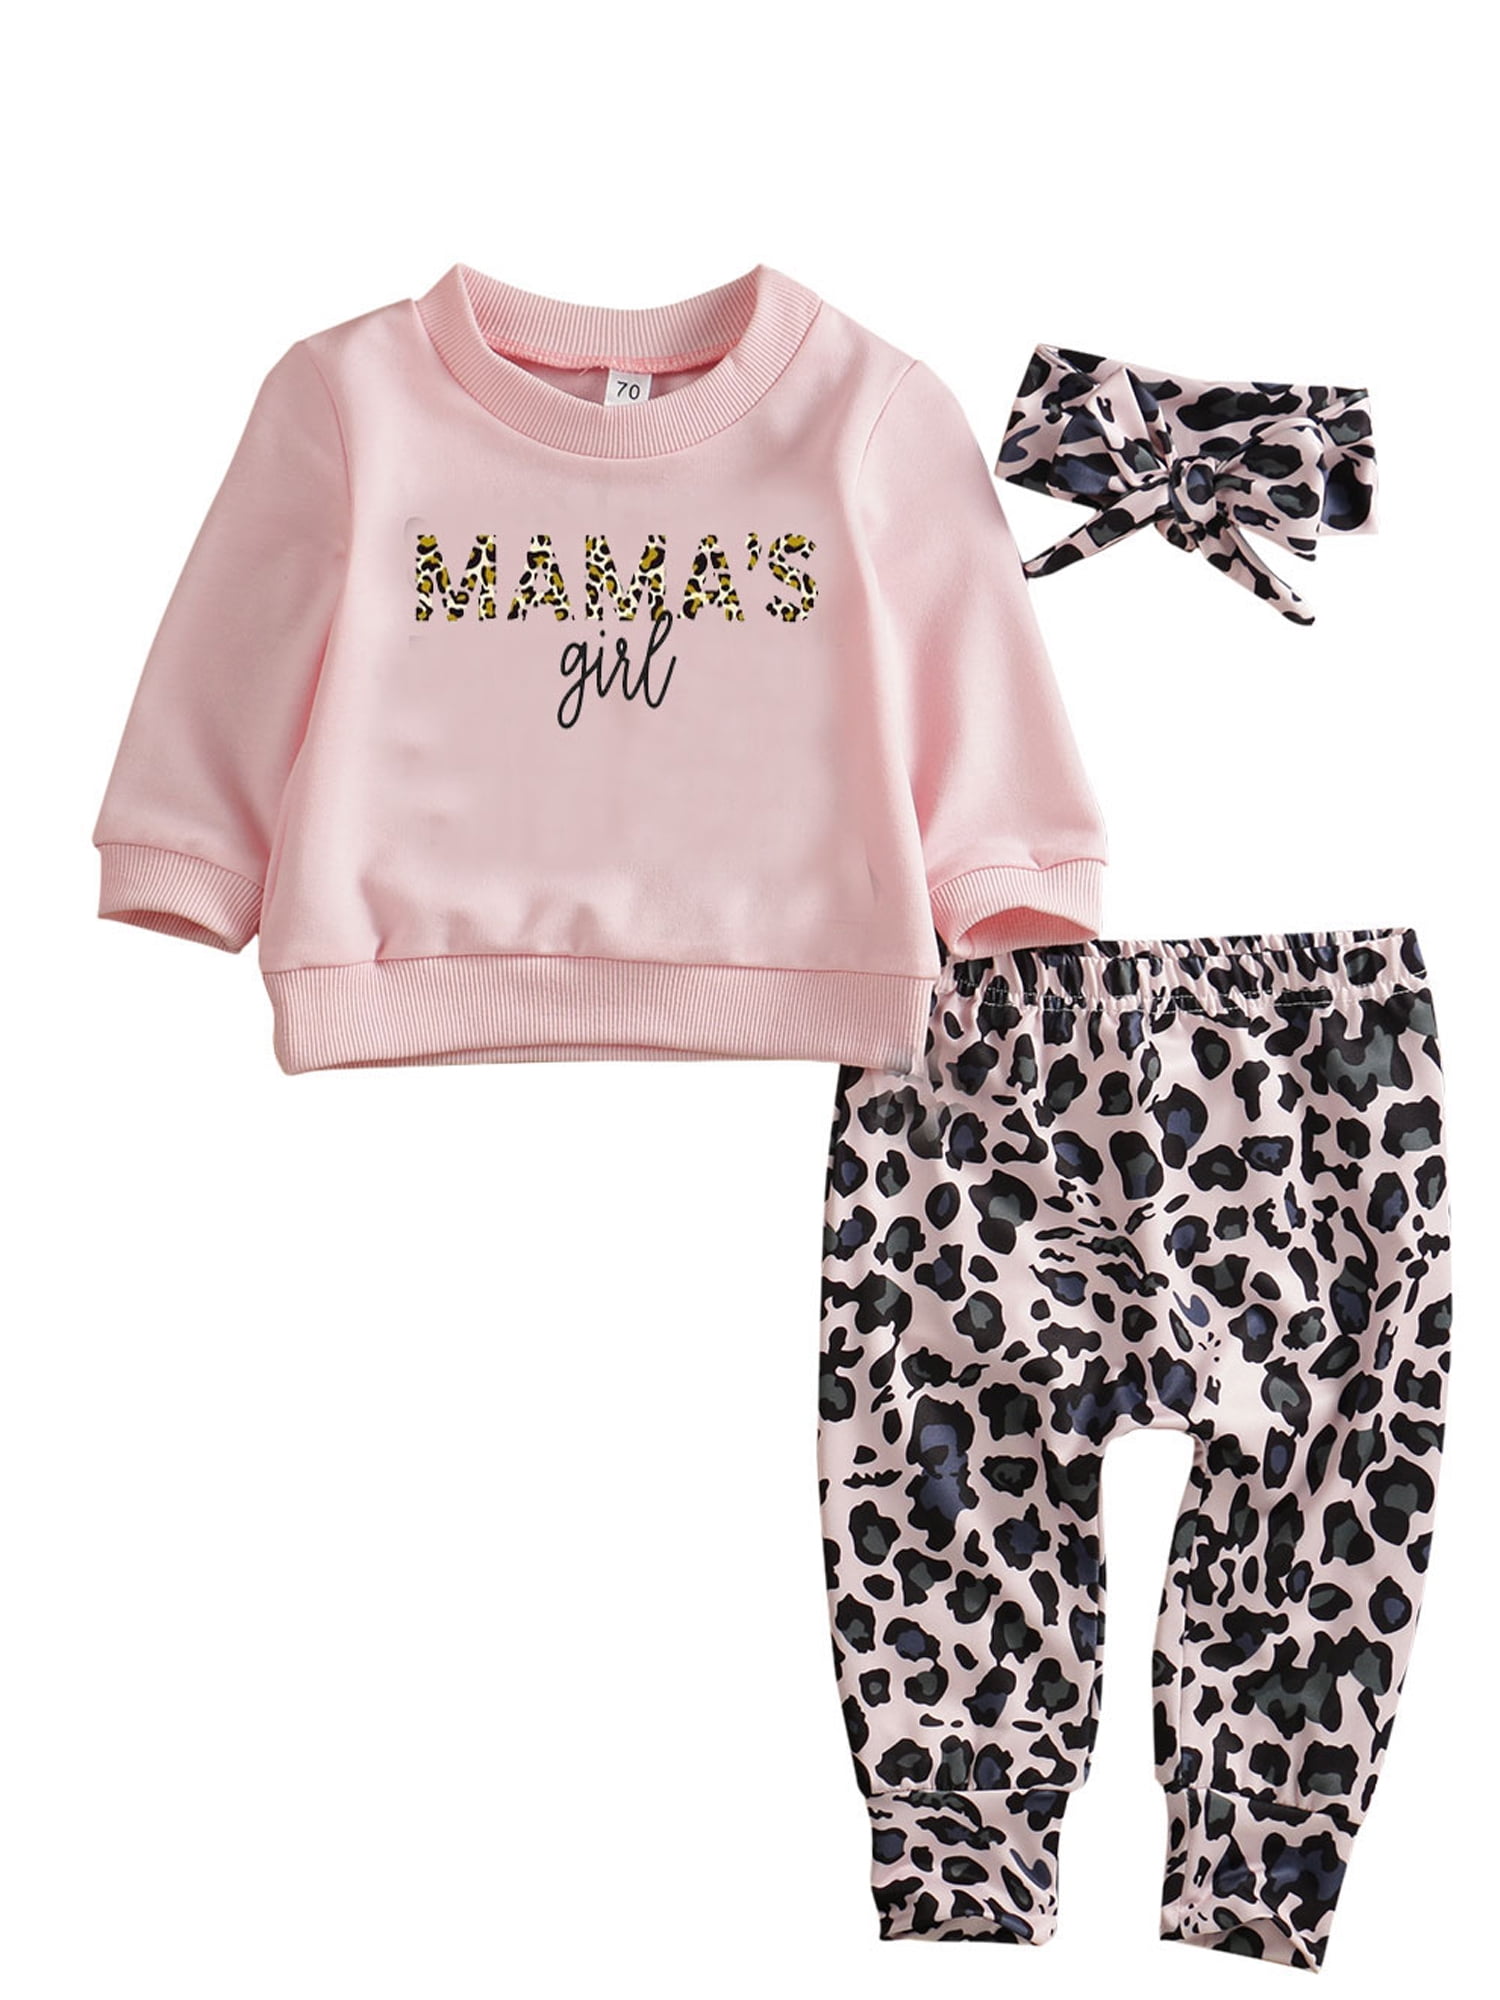 Baby Girl Outfit 2 Piece Hoodie Pants Pin Leopard 0 3 6 12 18 Months Newborn New 